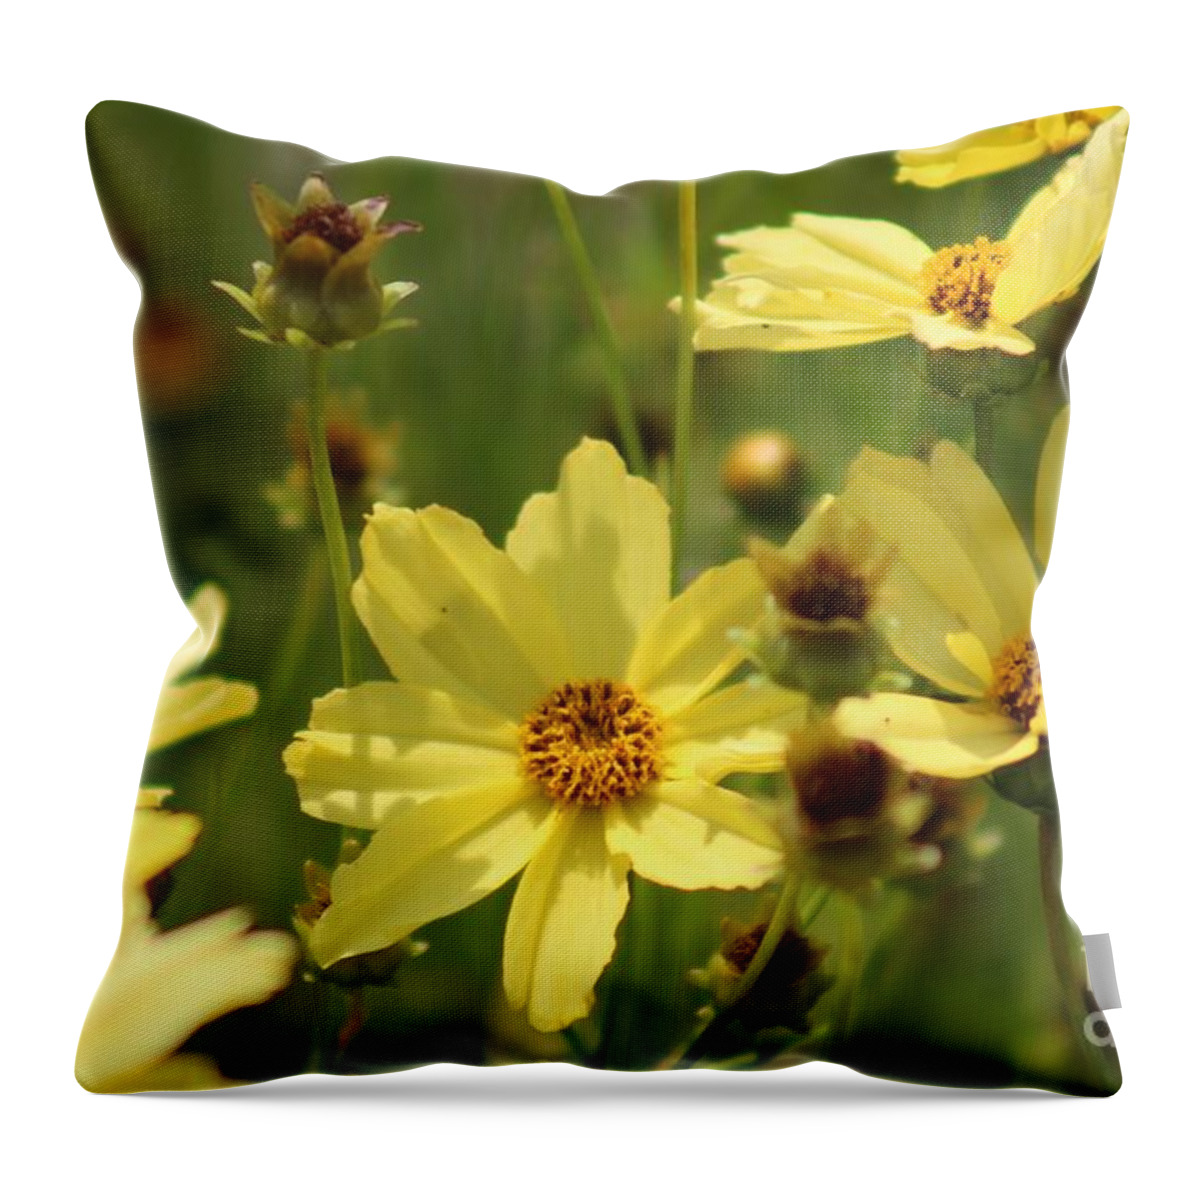 Yellow Throw Pillow featuring the photograph Nature's Beauty 64 by Deena Withycombe